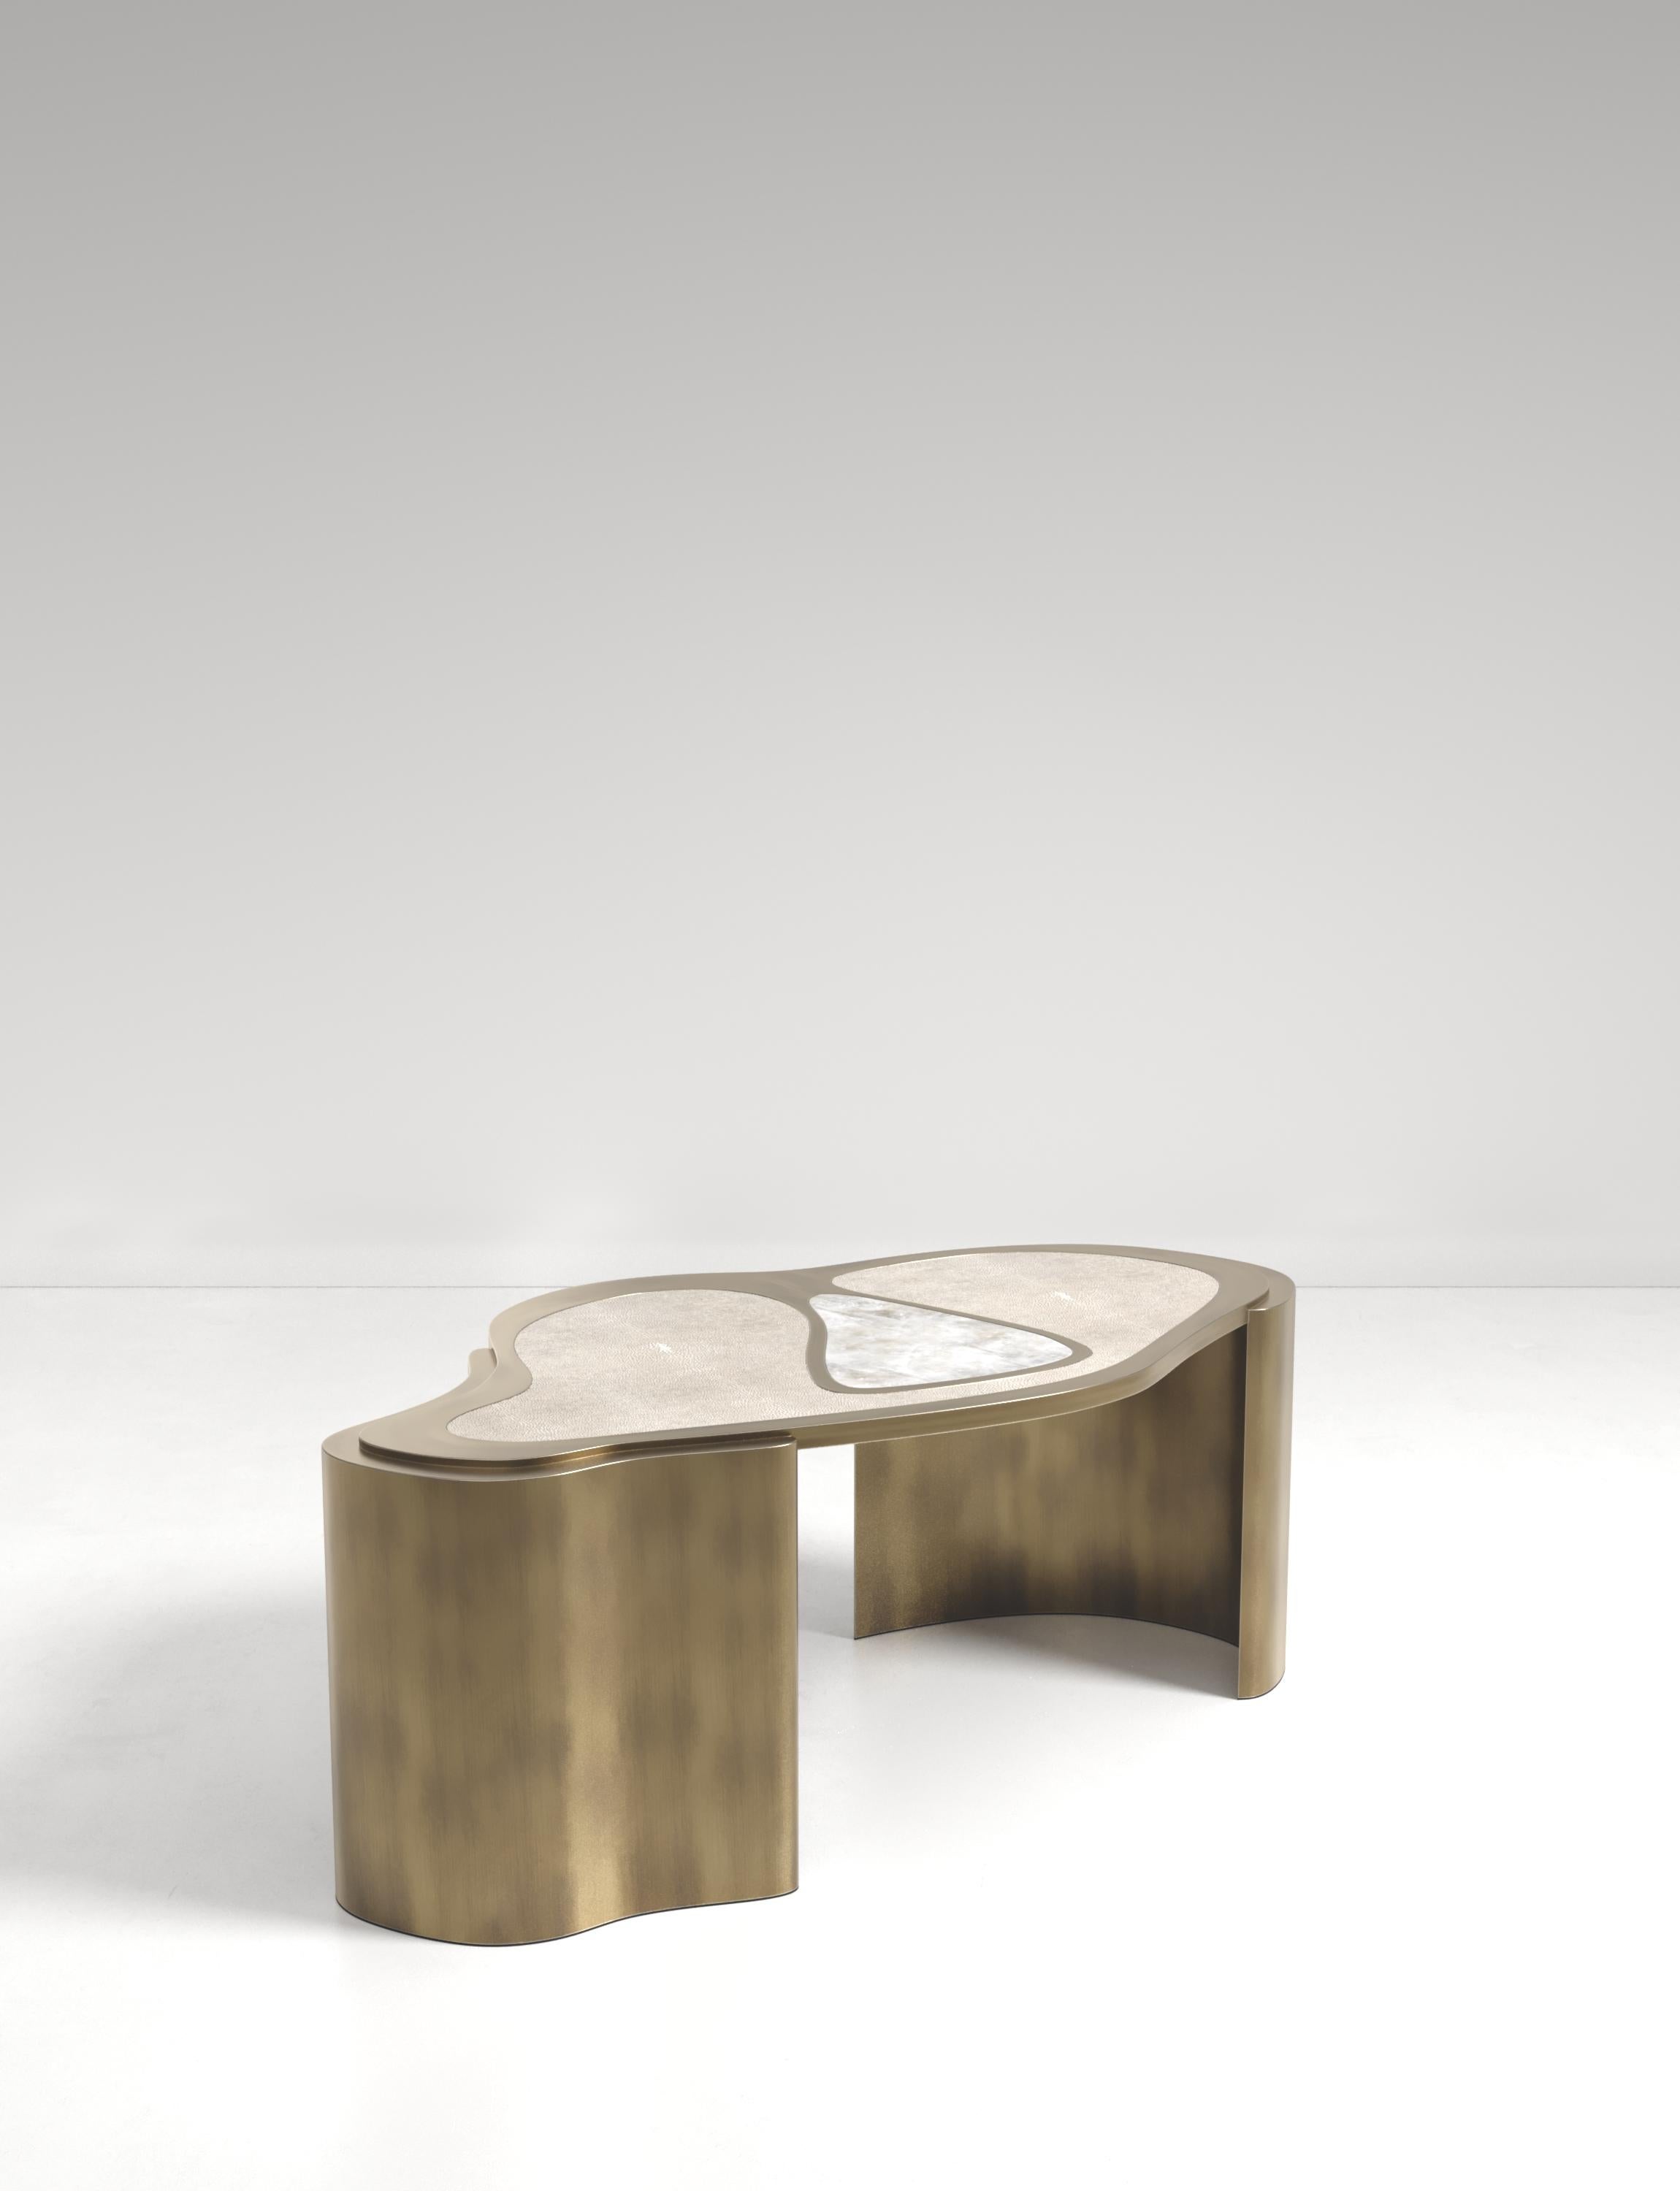 The Mask Coffee Table by Kifu Paris is a versatile and organic piece. The amorphous top and base are inlaid in a mixture of cream shagreen, white quartz and bronze-patina brass. This piece is designed by Kifu Augousti the daughter of Ria and Yiouri